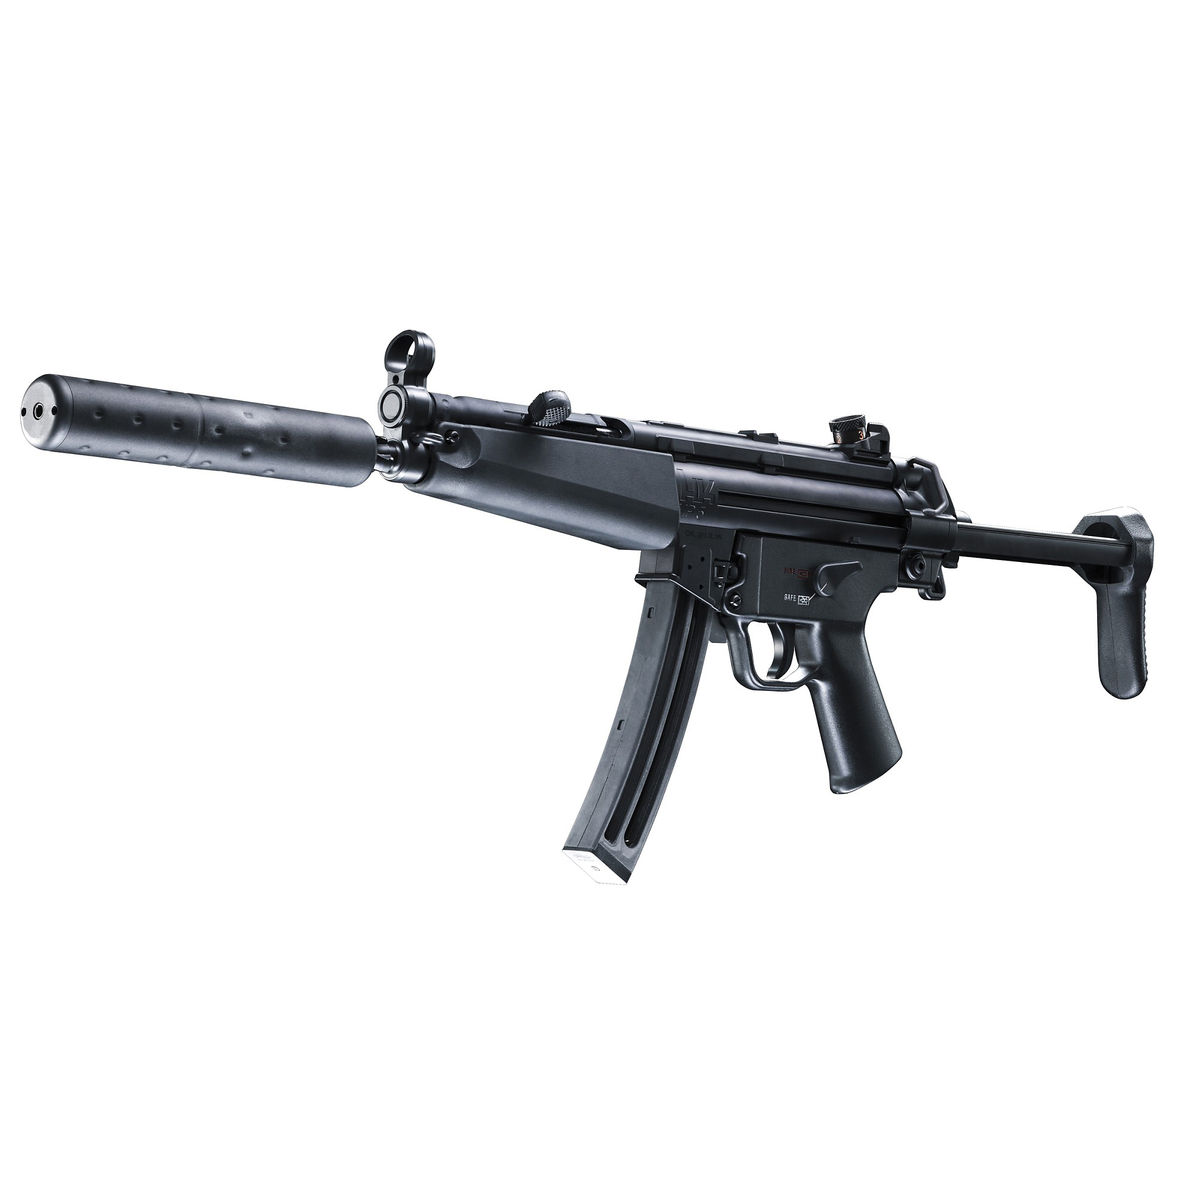 Heckler & Koch MP5 Pics, Weapons Collection